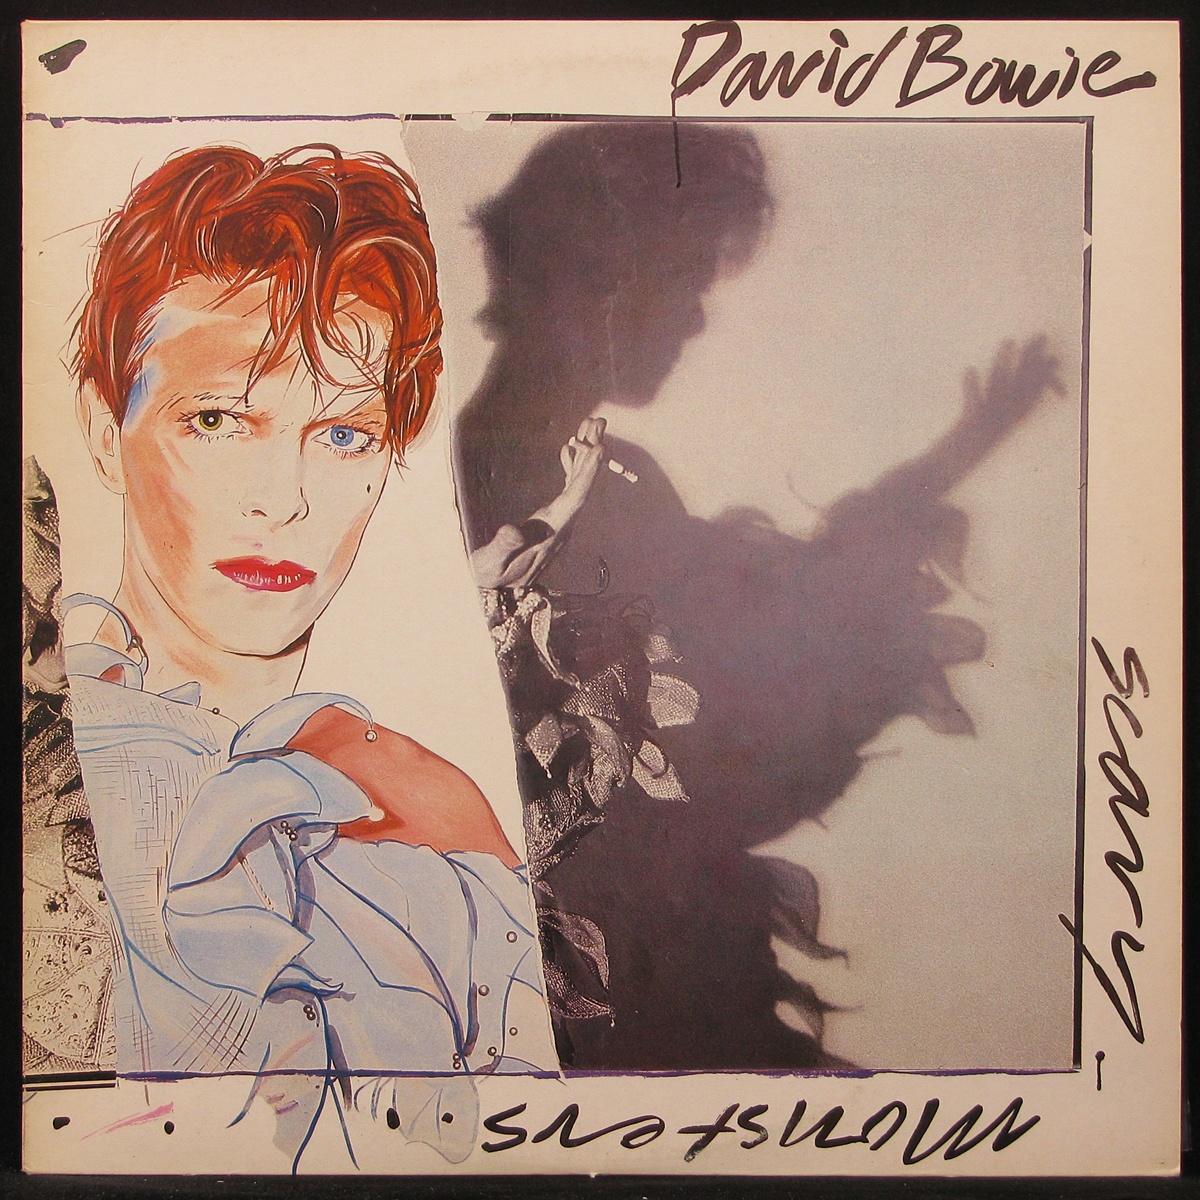 LP David Bowie — Scary Monsters фото